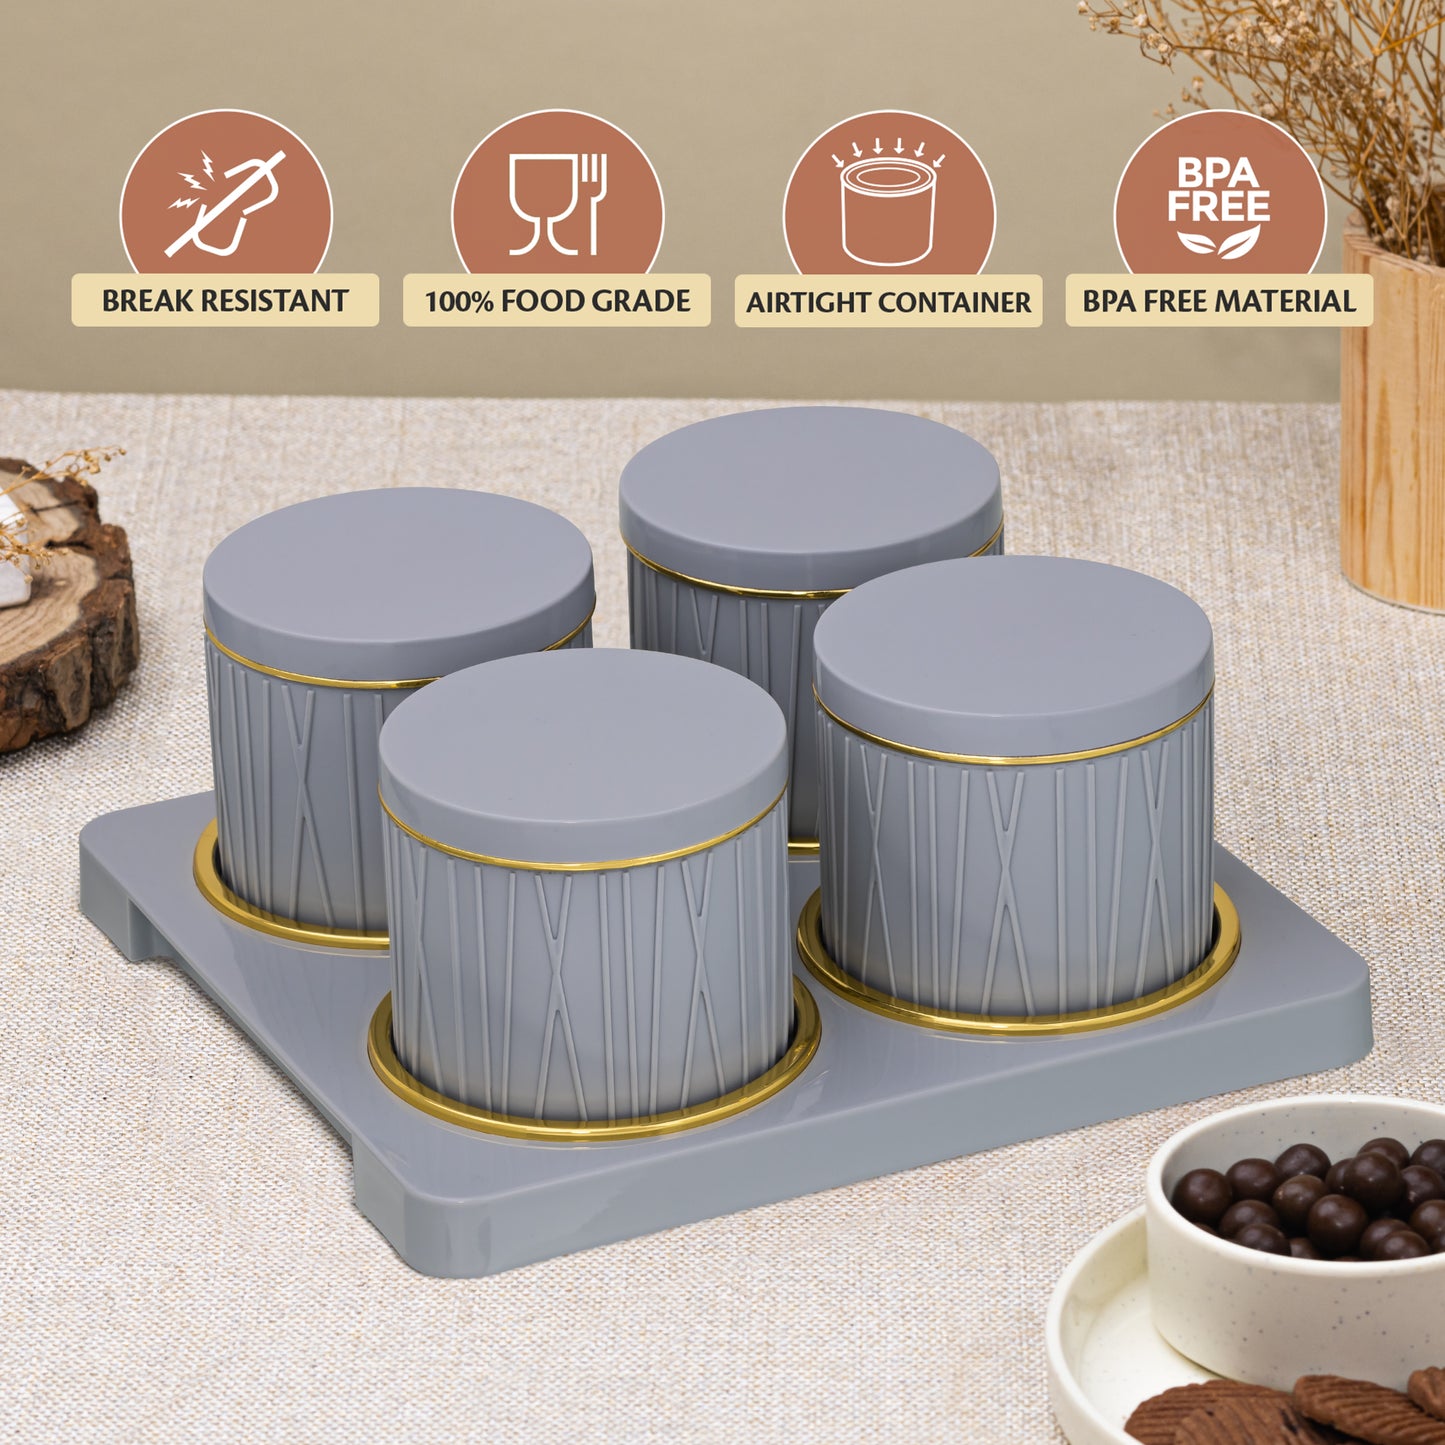 SELVEL Dune Airtight Dry Fruit Container Tray Set - 4 Pieces (450ml) - Bluish Grey Polypropylene with Subtle Gold Rim